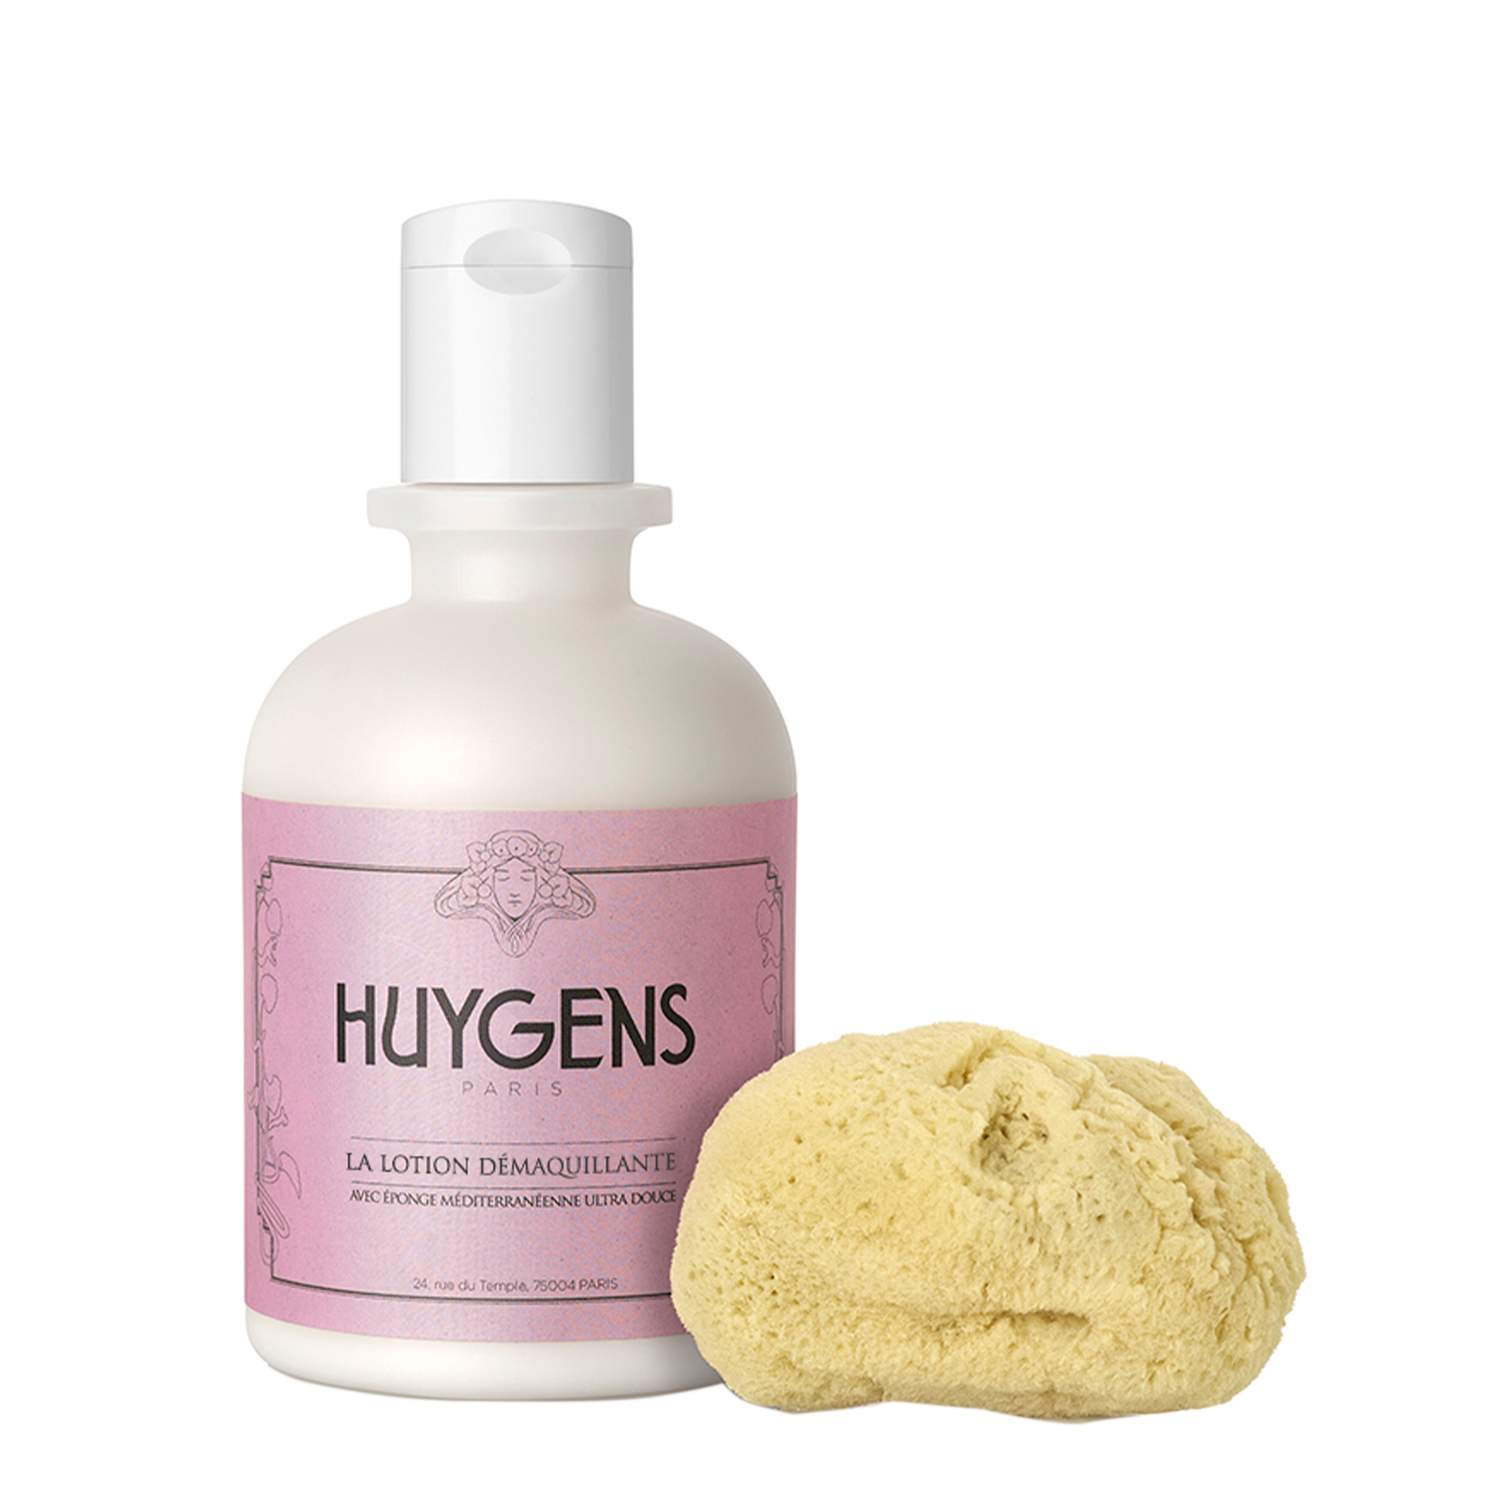 Huygens Cleansing Lotion With Sea Sponge Huygens Cleansing Lotion With Sea Sponge 1